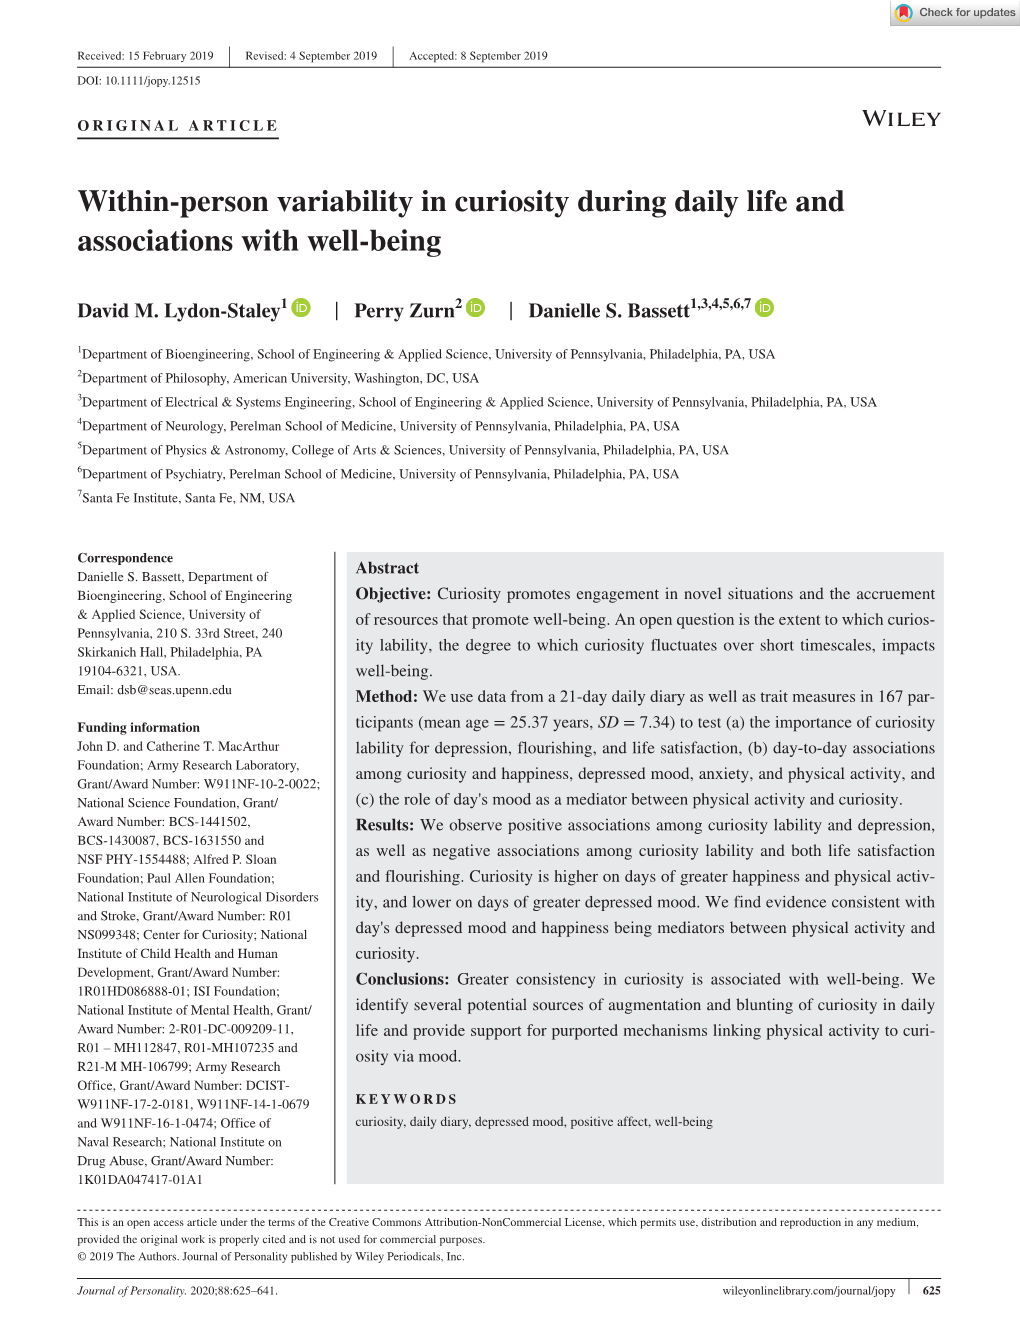 Pdffor Within-Person Variability in Curiosity During Daily Life and Associations with Well-Being